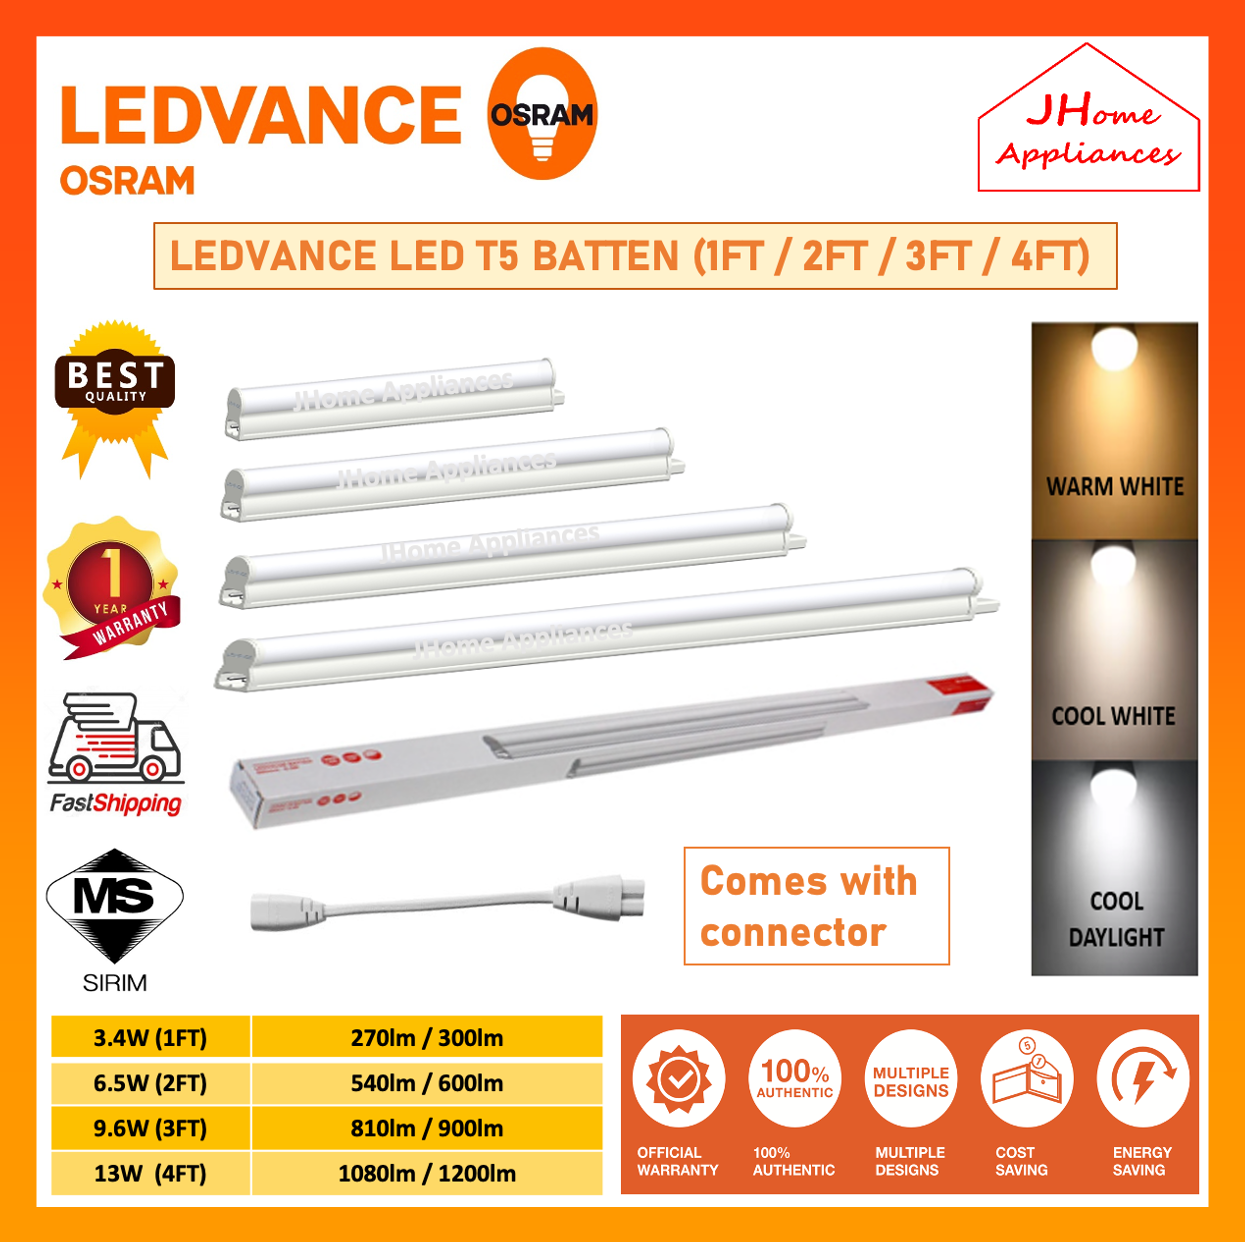 Photo necklace Because OSRAM LEDVANCE LED T5 BATTEN [ 1FT/2FT/3FT/4FT ] [ 3.4W/6.5W/9.6W/13W ] LED  TUBE LIGHTING WITH CONNECTOR | Lazada